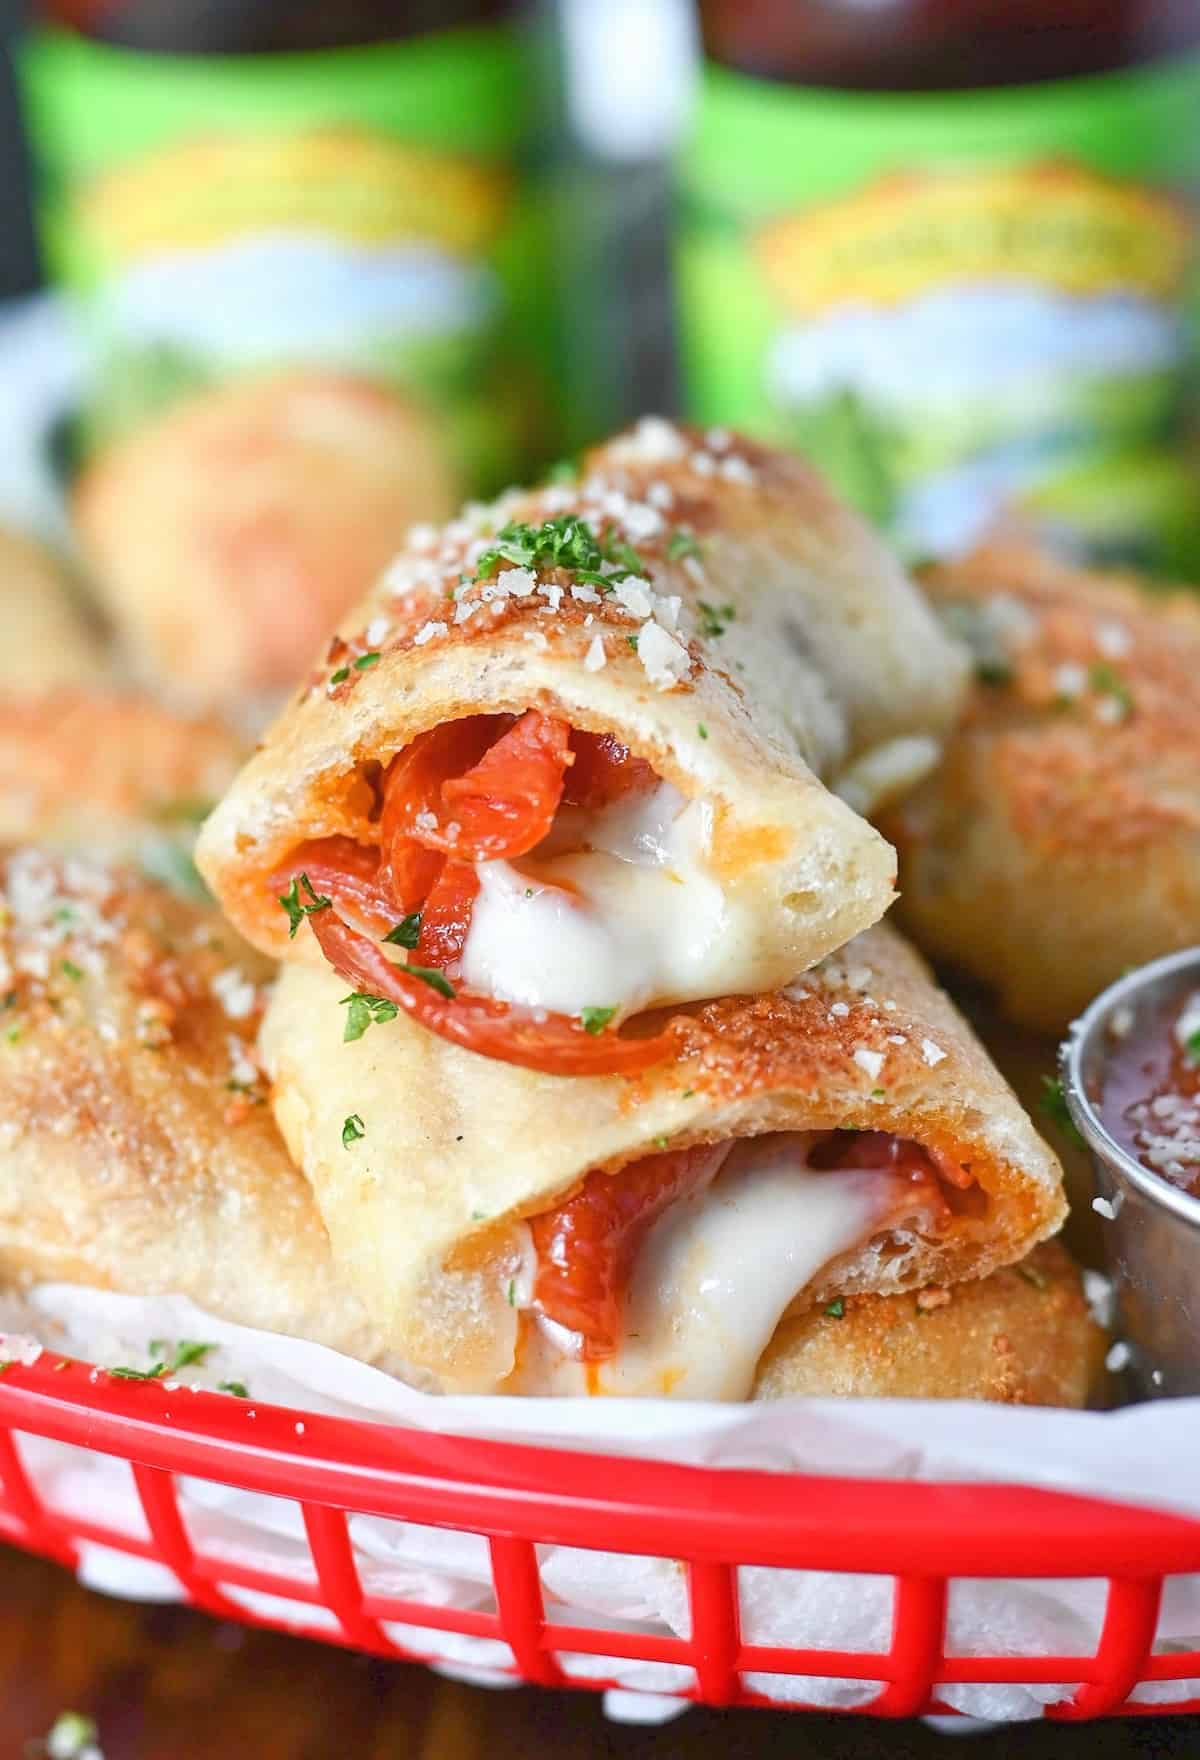 Pepperoni and cheese stuffed breadstick cut in half. Placed in a red basket with cheese oozing out, beer in the background and a side of pizza sauce. 